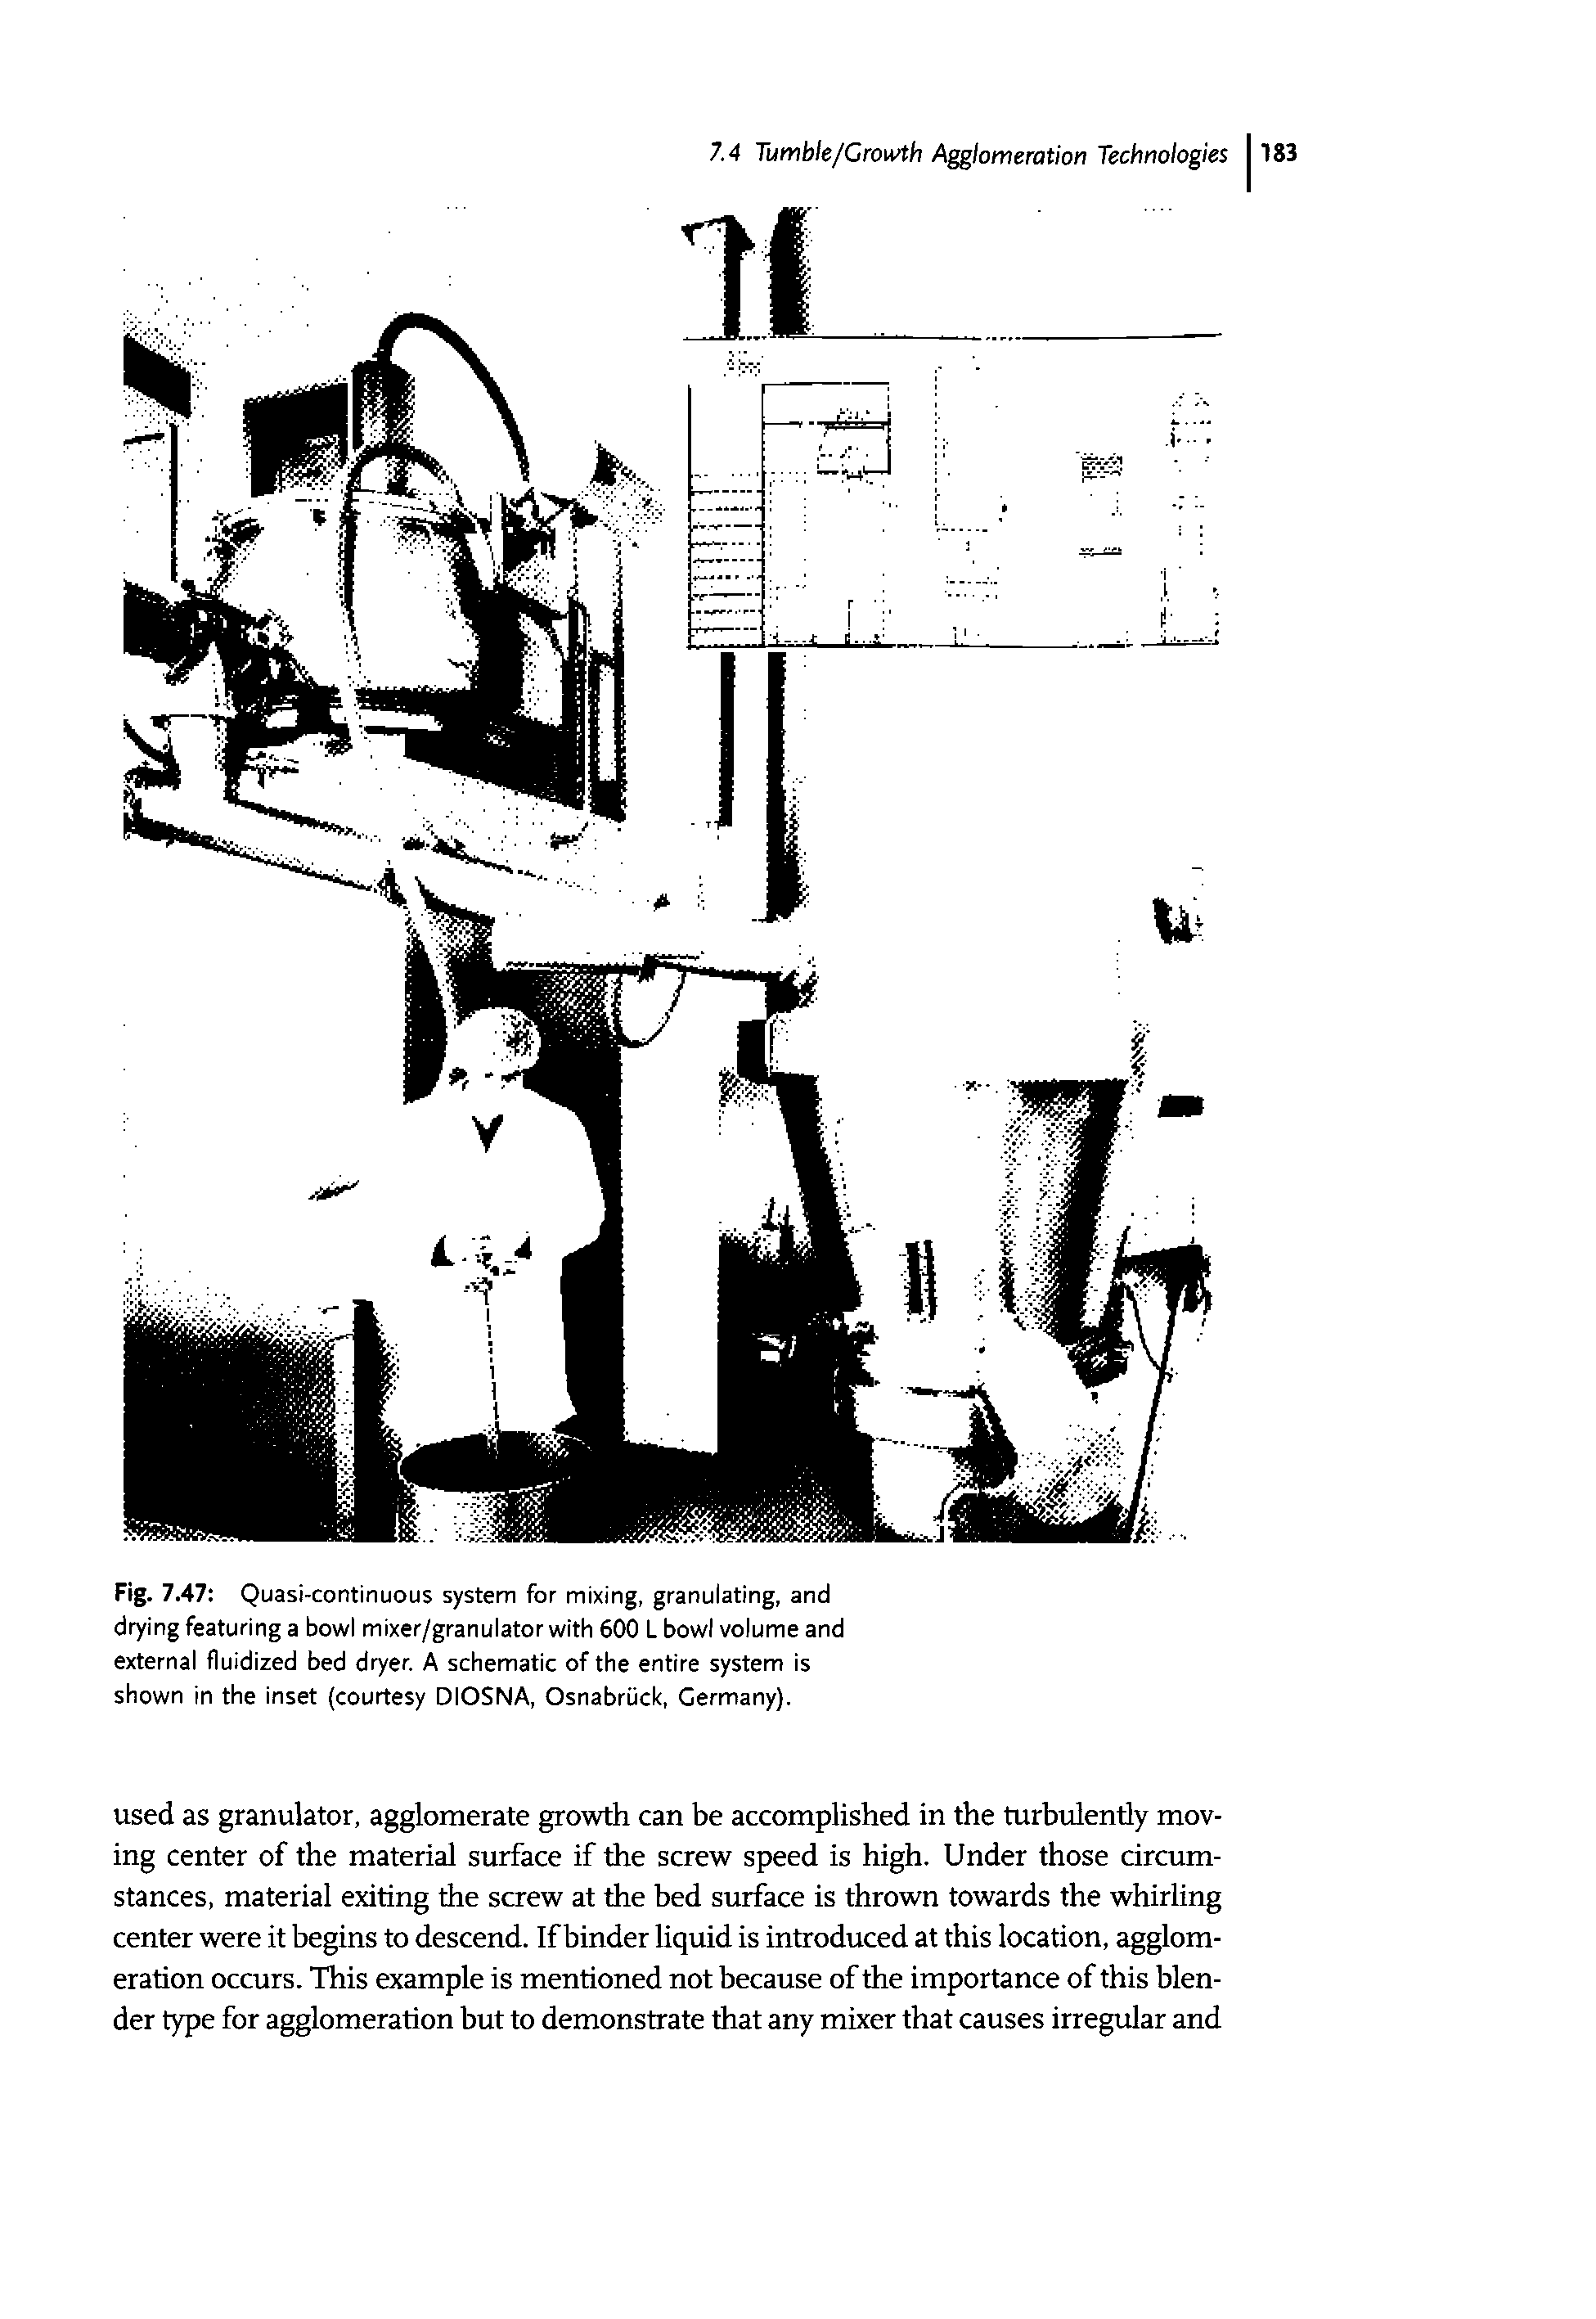 Fig. 7.47 Quasi-continuous system for mixing, granulating, and drying featuring a bowl mixer/granulatorwith 600 L bowl volume and external fluidized bed dryer. A schematic of the entire system is shown in the inset (courtesy DIOSNA, Osnabriick, Germany).